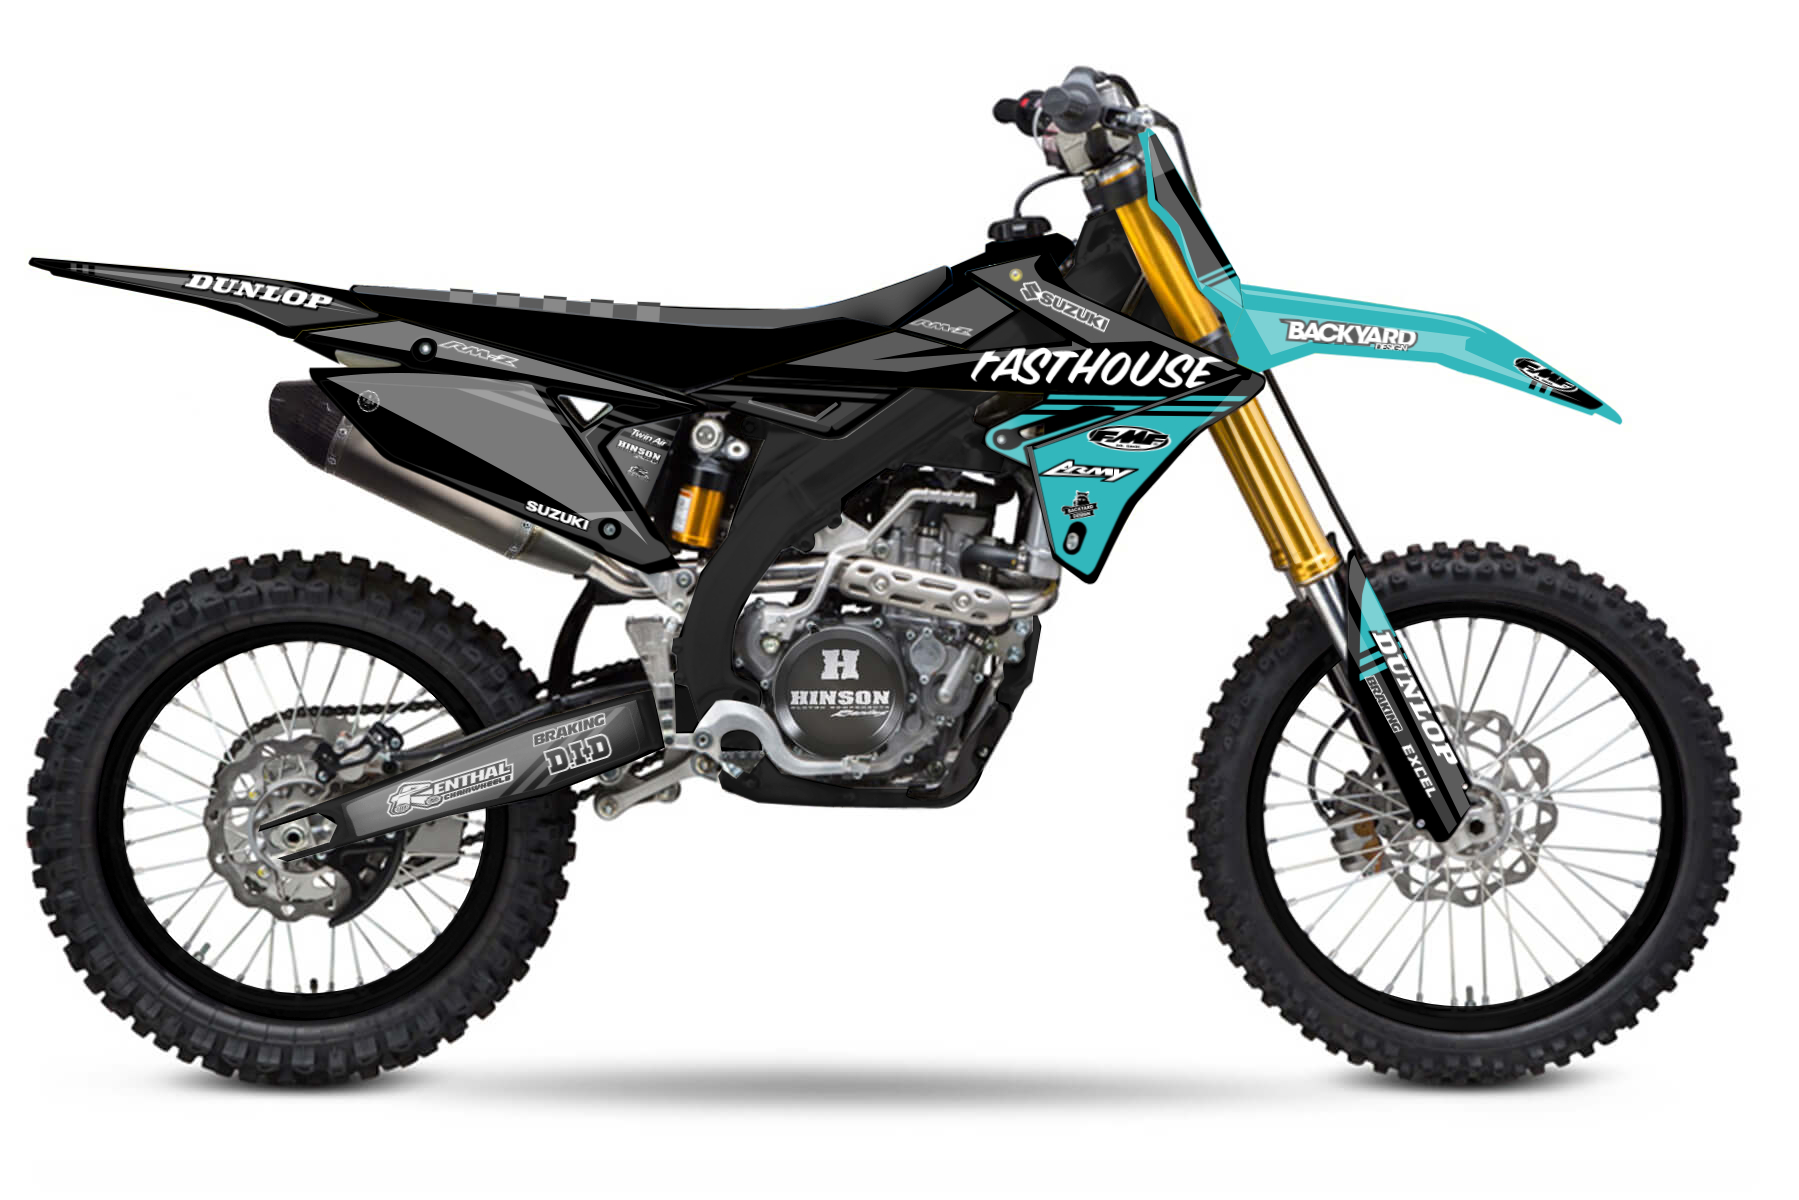 Suzuki RMZ 250
Graphic Kits

An easy to control braking power, a higher engine power and improved cornering combine to a well balanced bike that will fit your demands while conquering all kinds of offroad tracks.